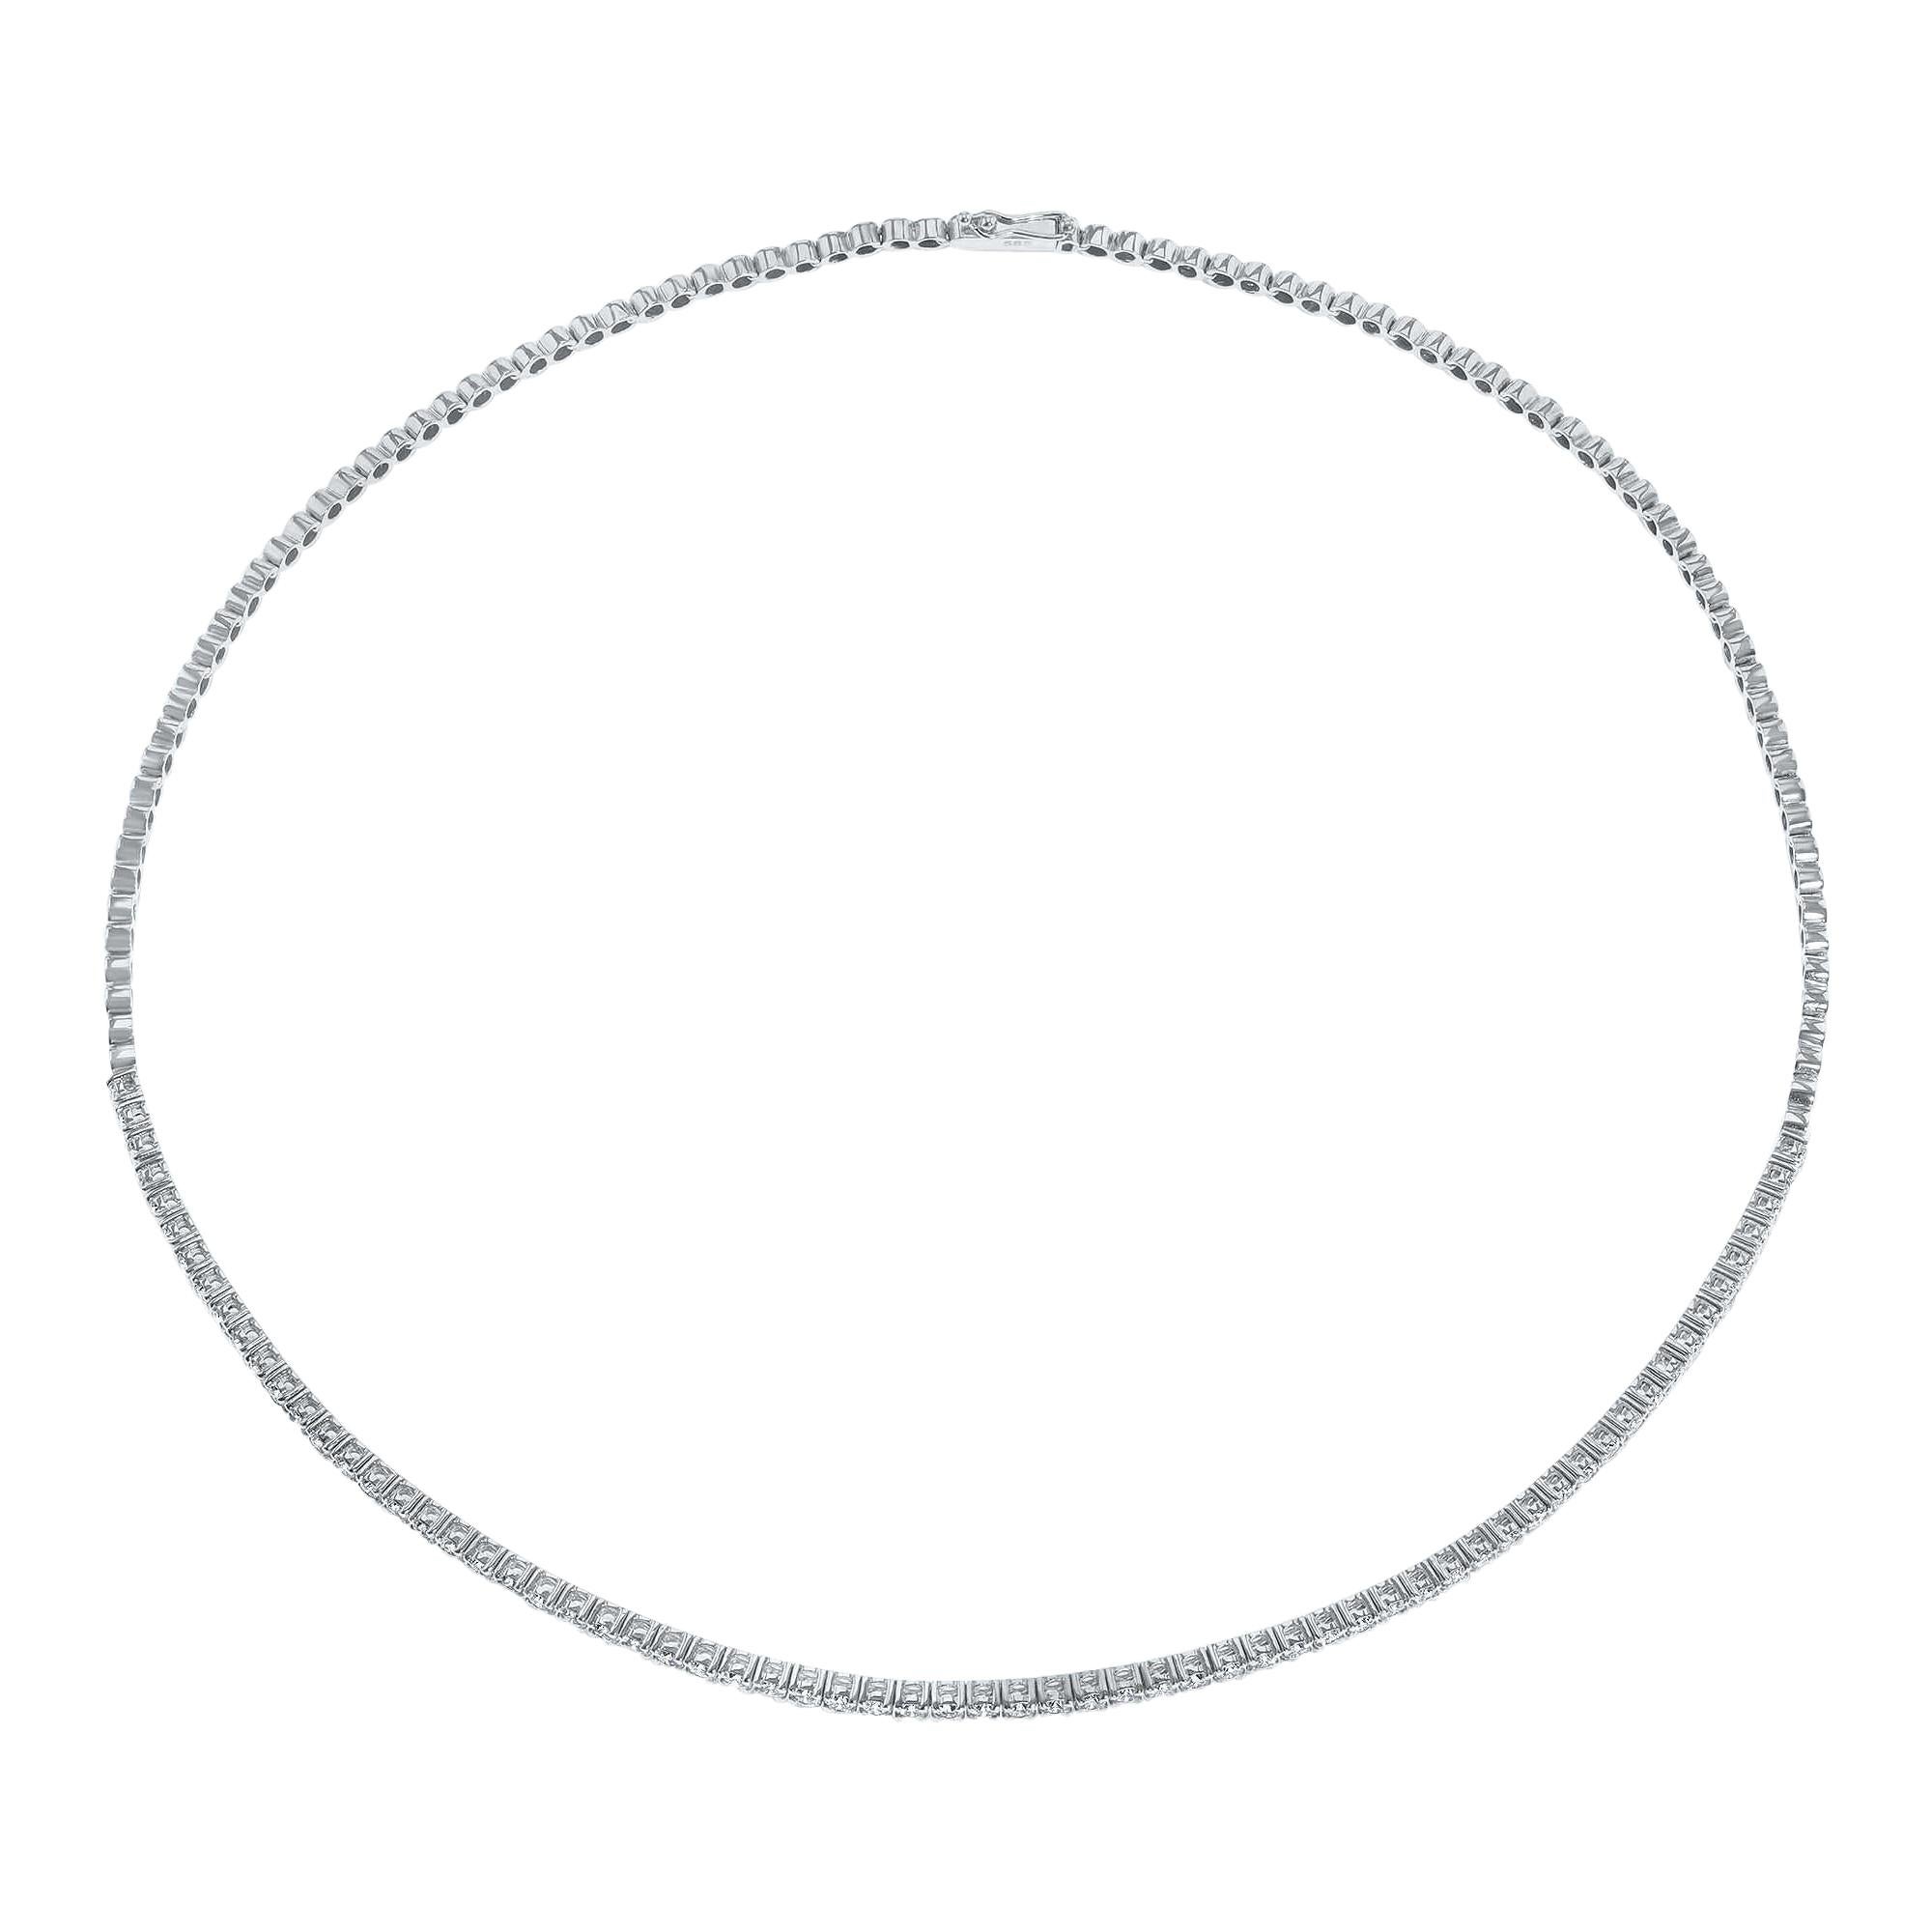 4.00 Carat Diamond Collier Necklace in 14 Karat White Gold - Atelier Collection For Sale